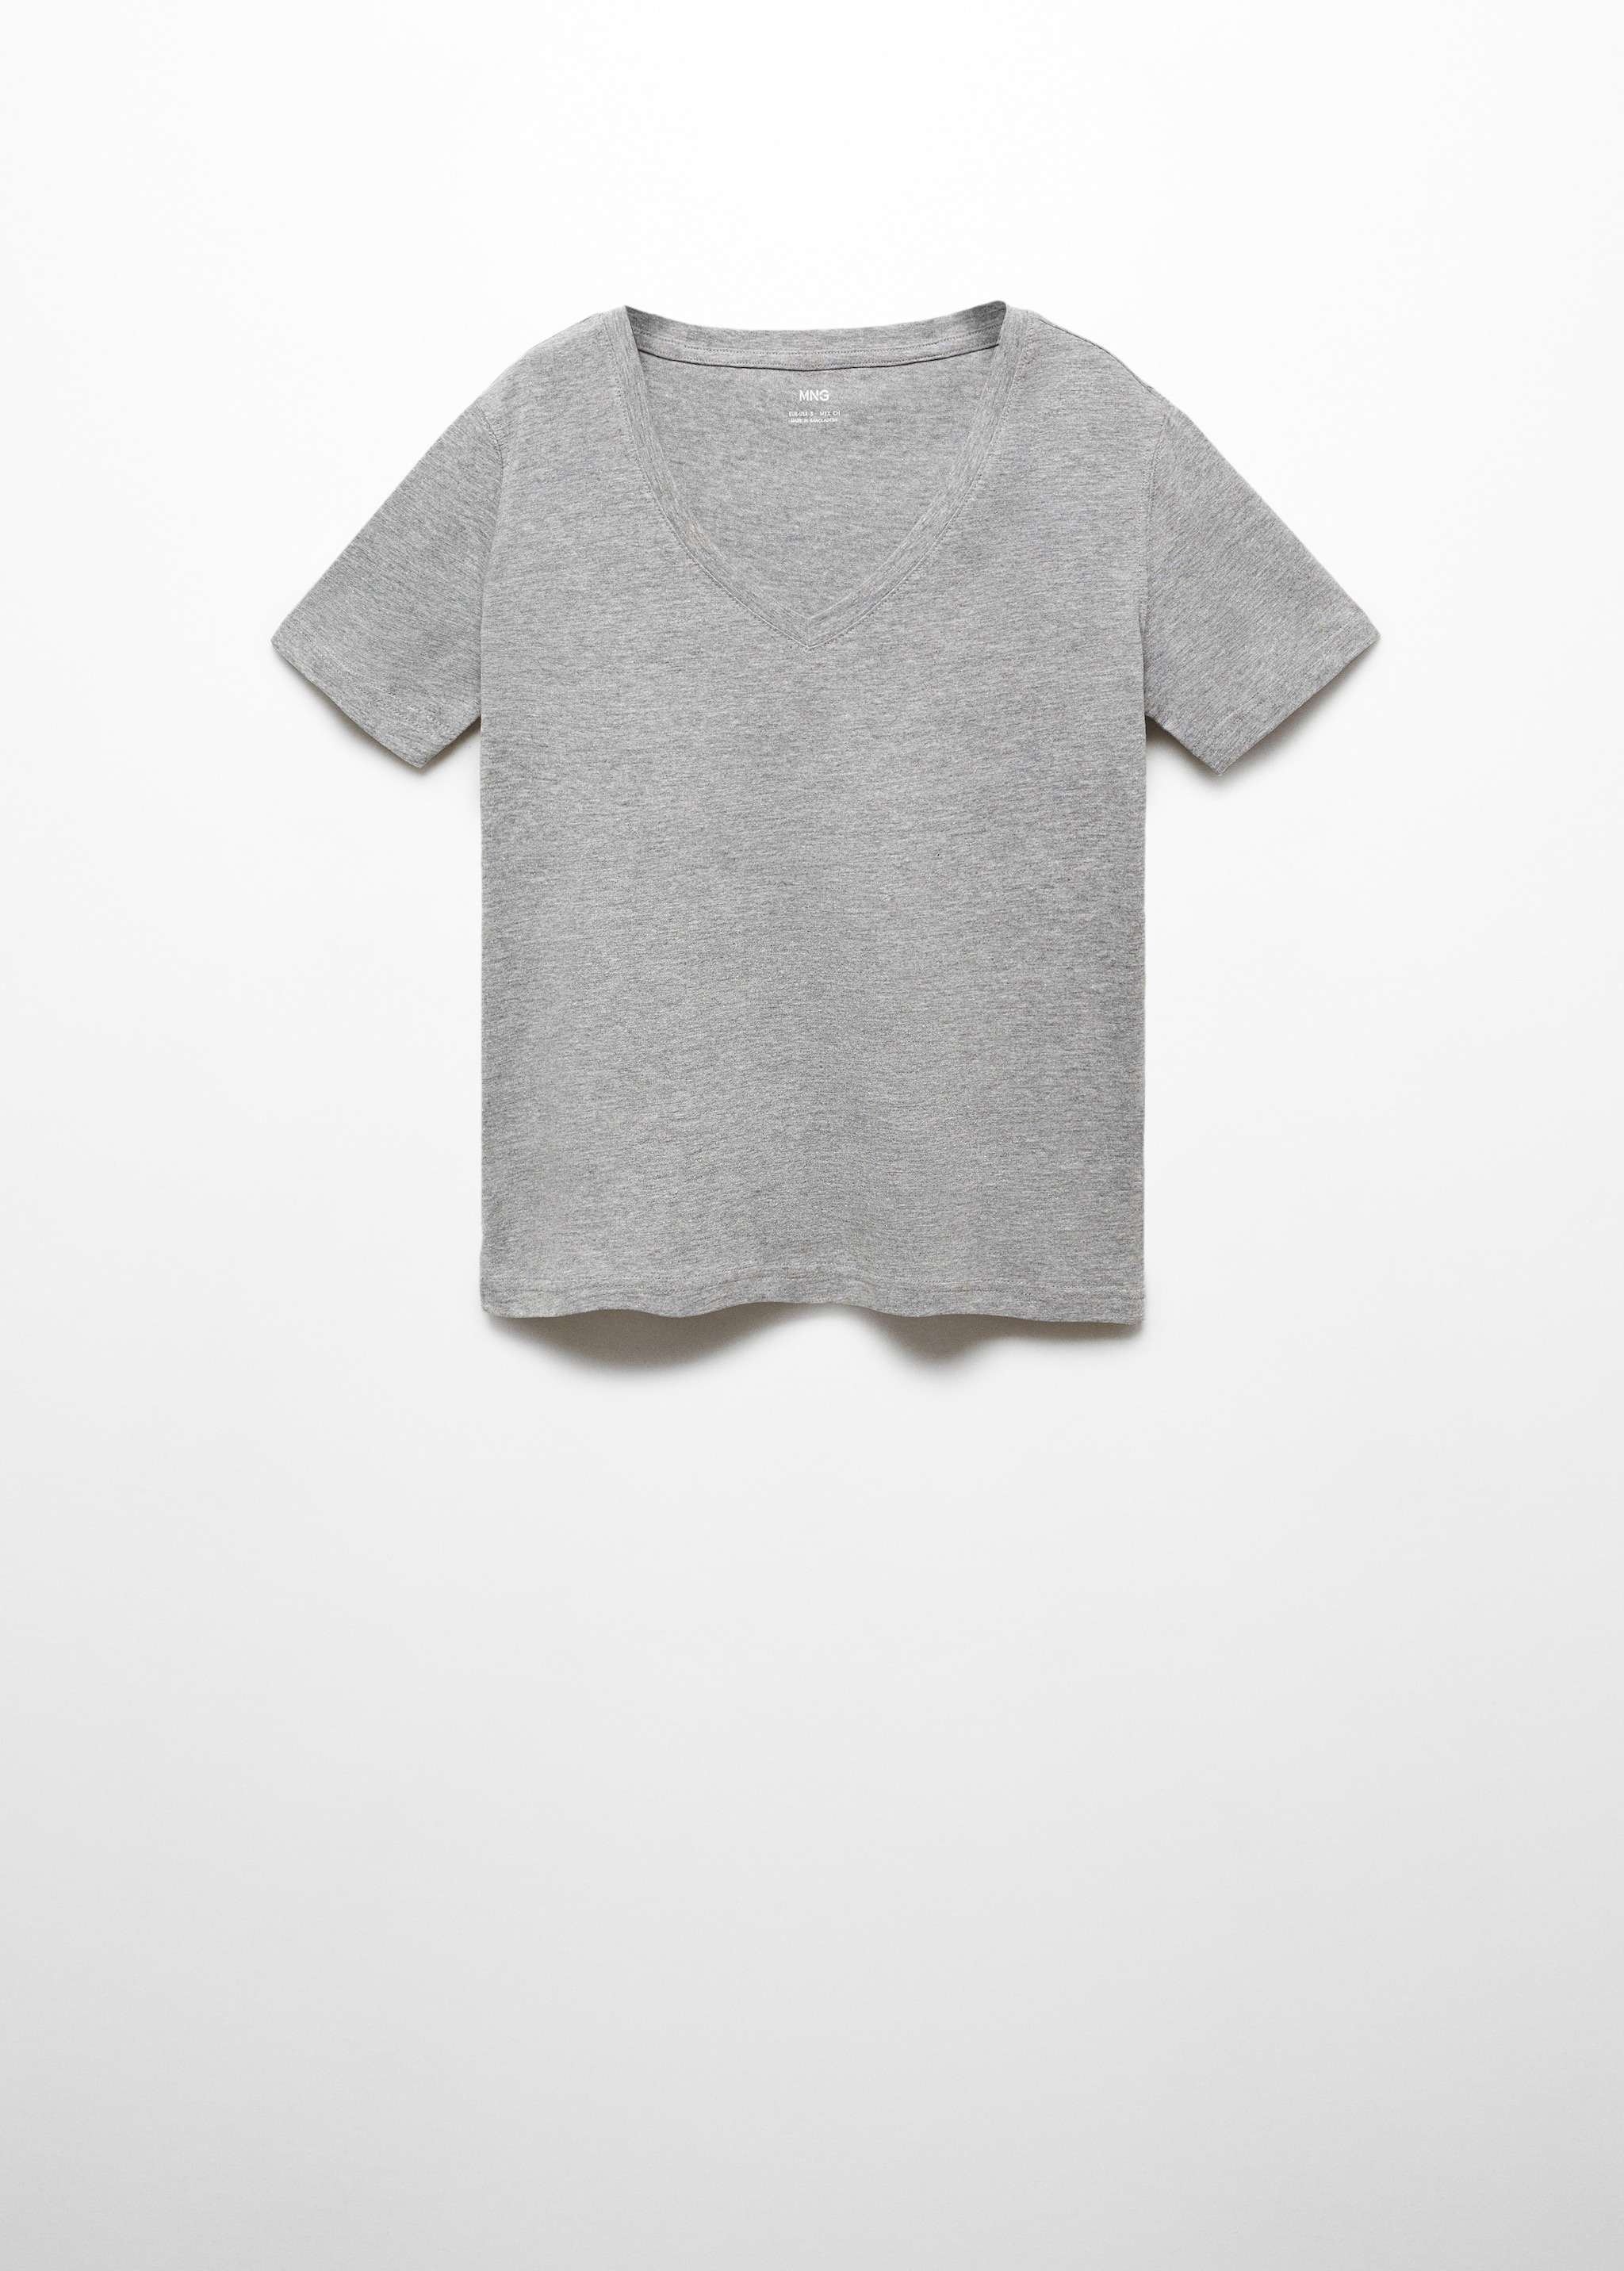 100% cotton V-neck t-shirt  - Article without model